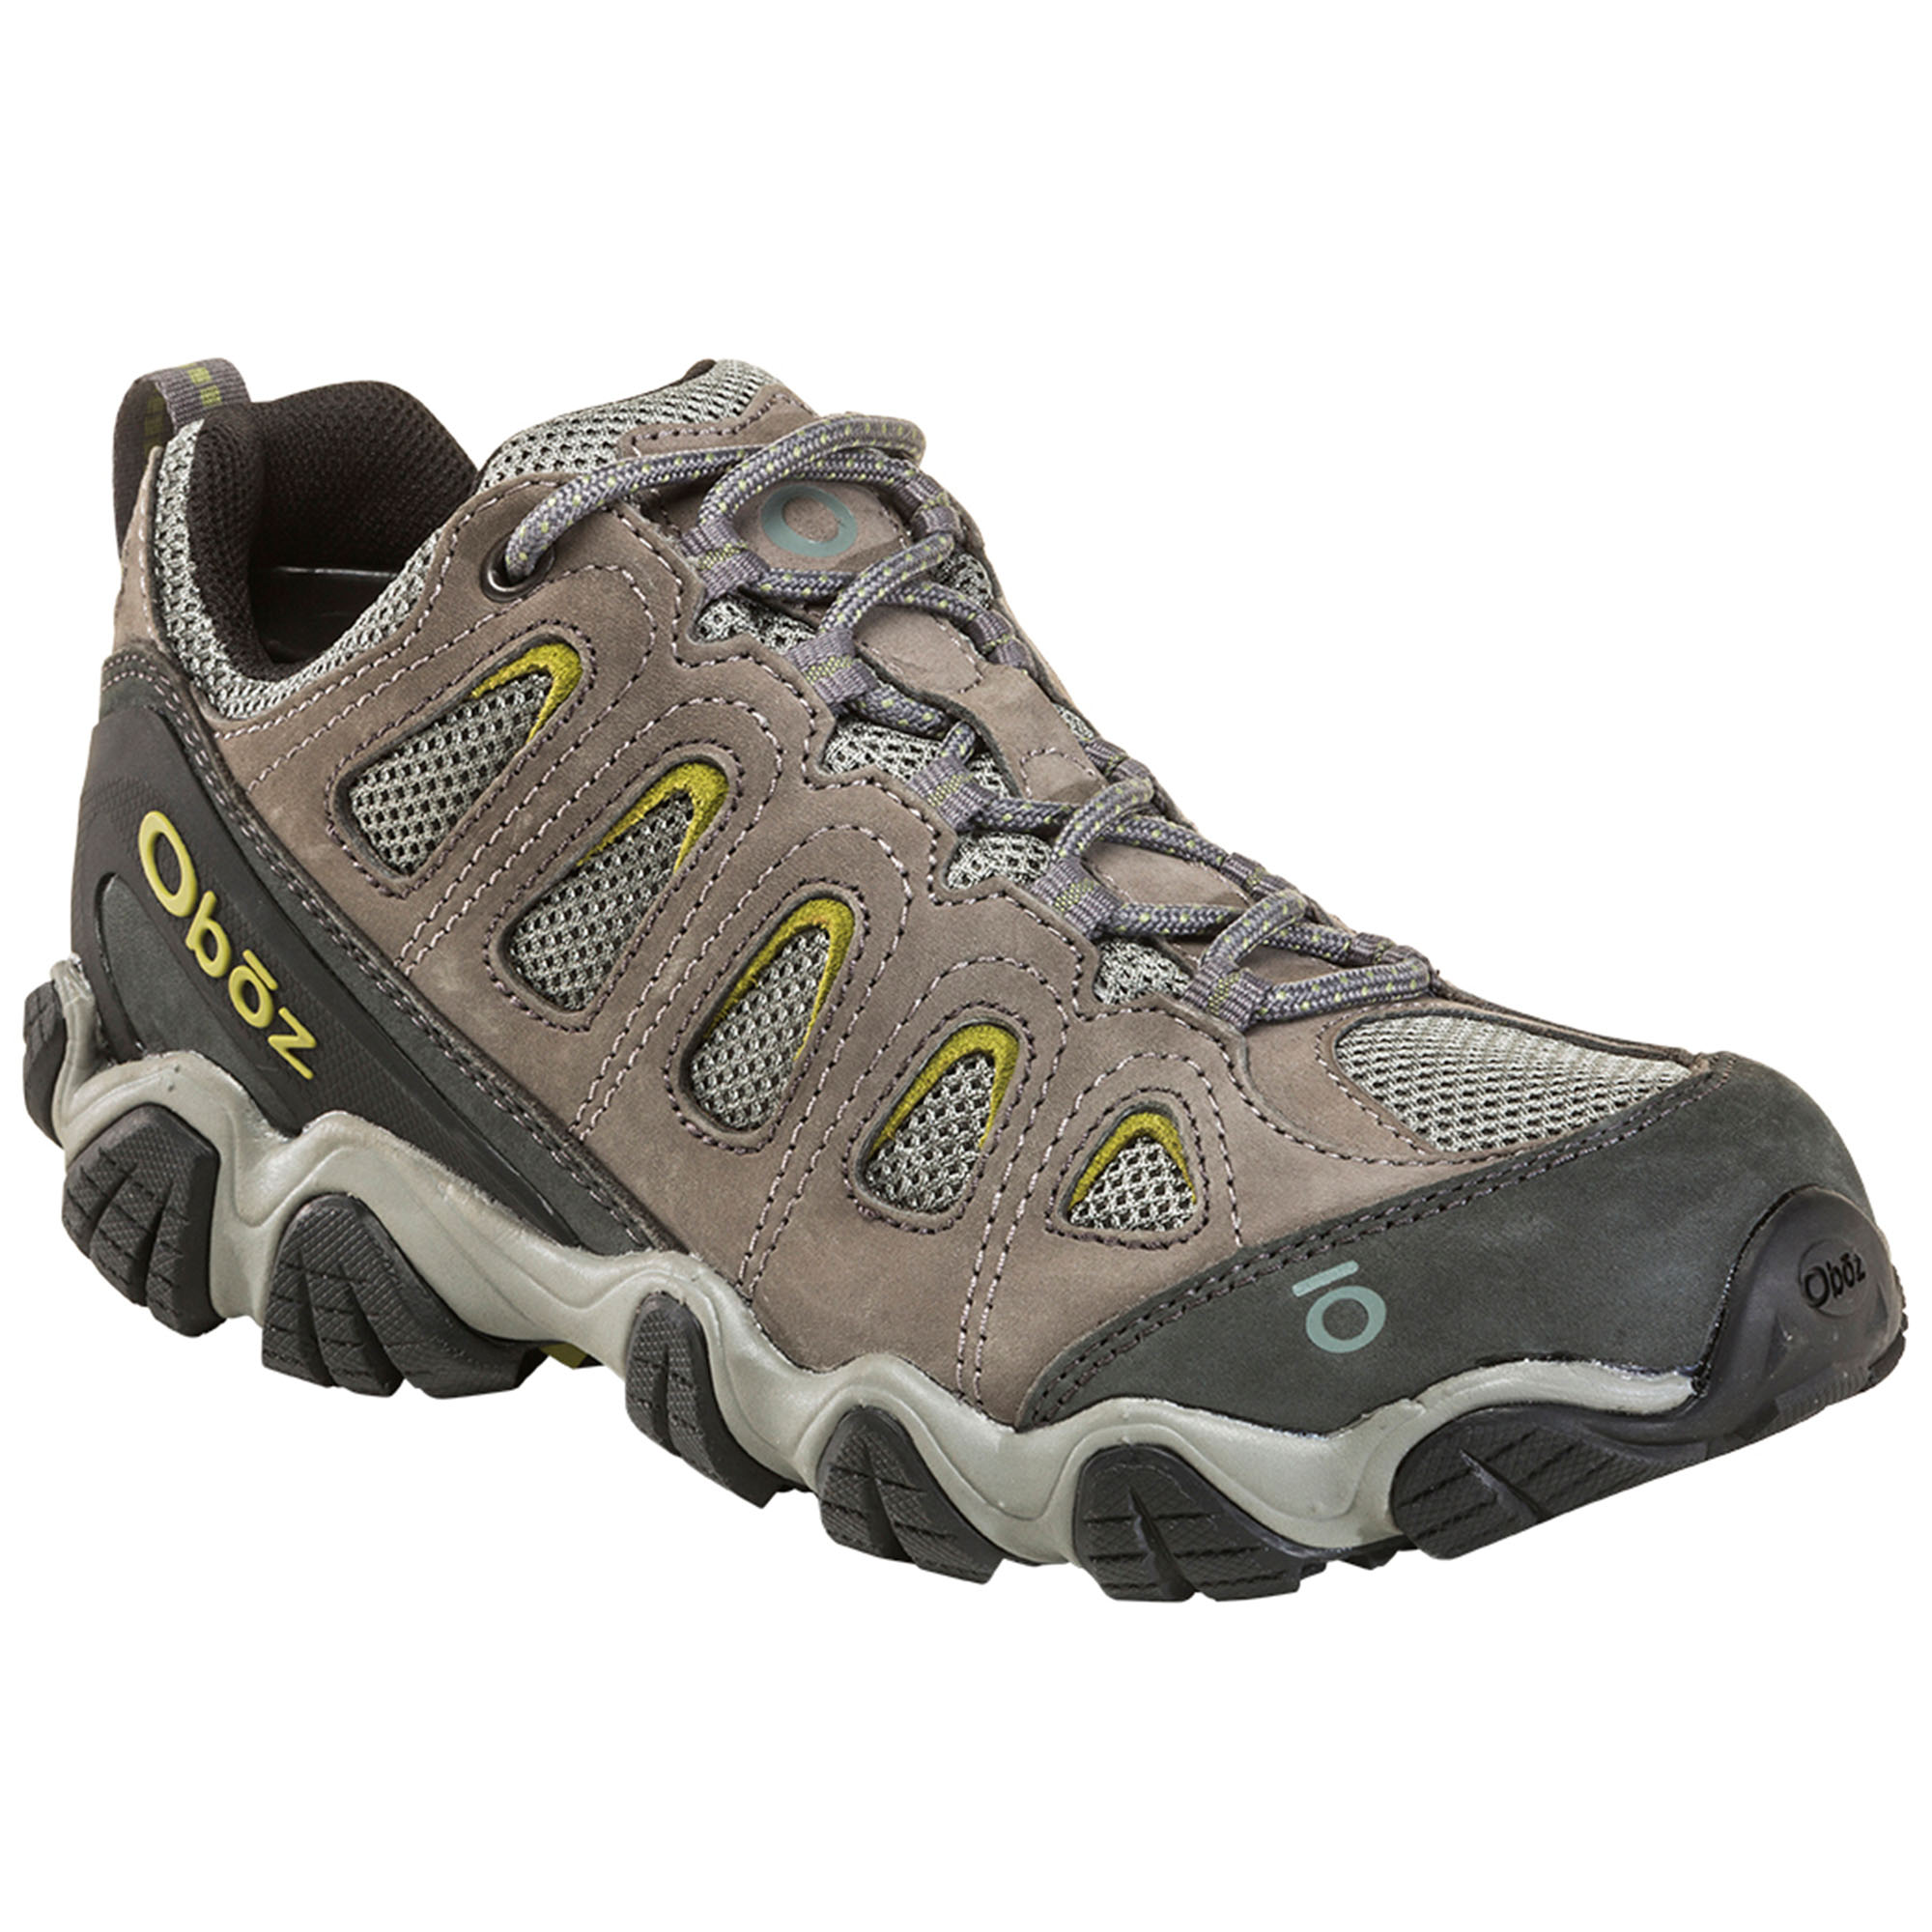 mens low hiking shoes